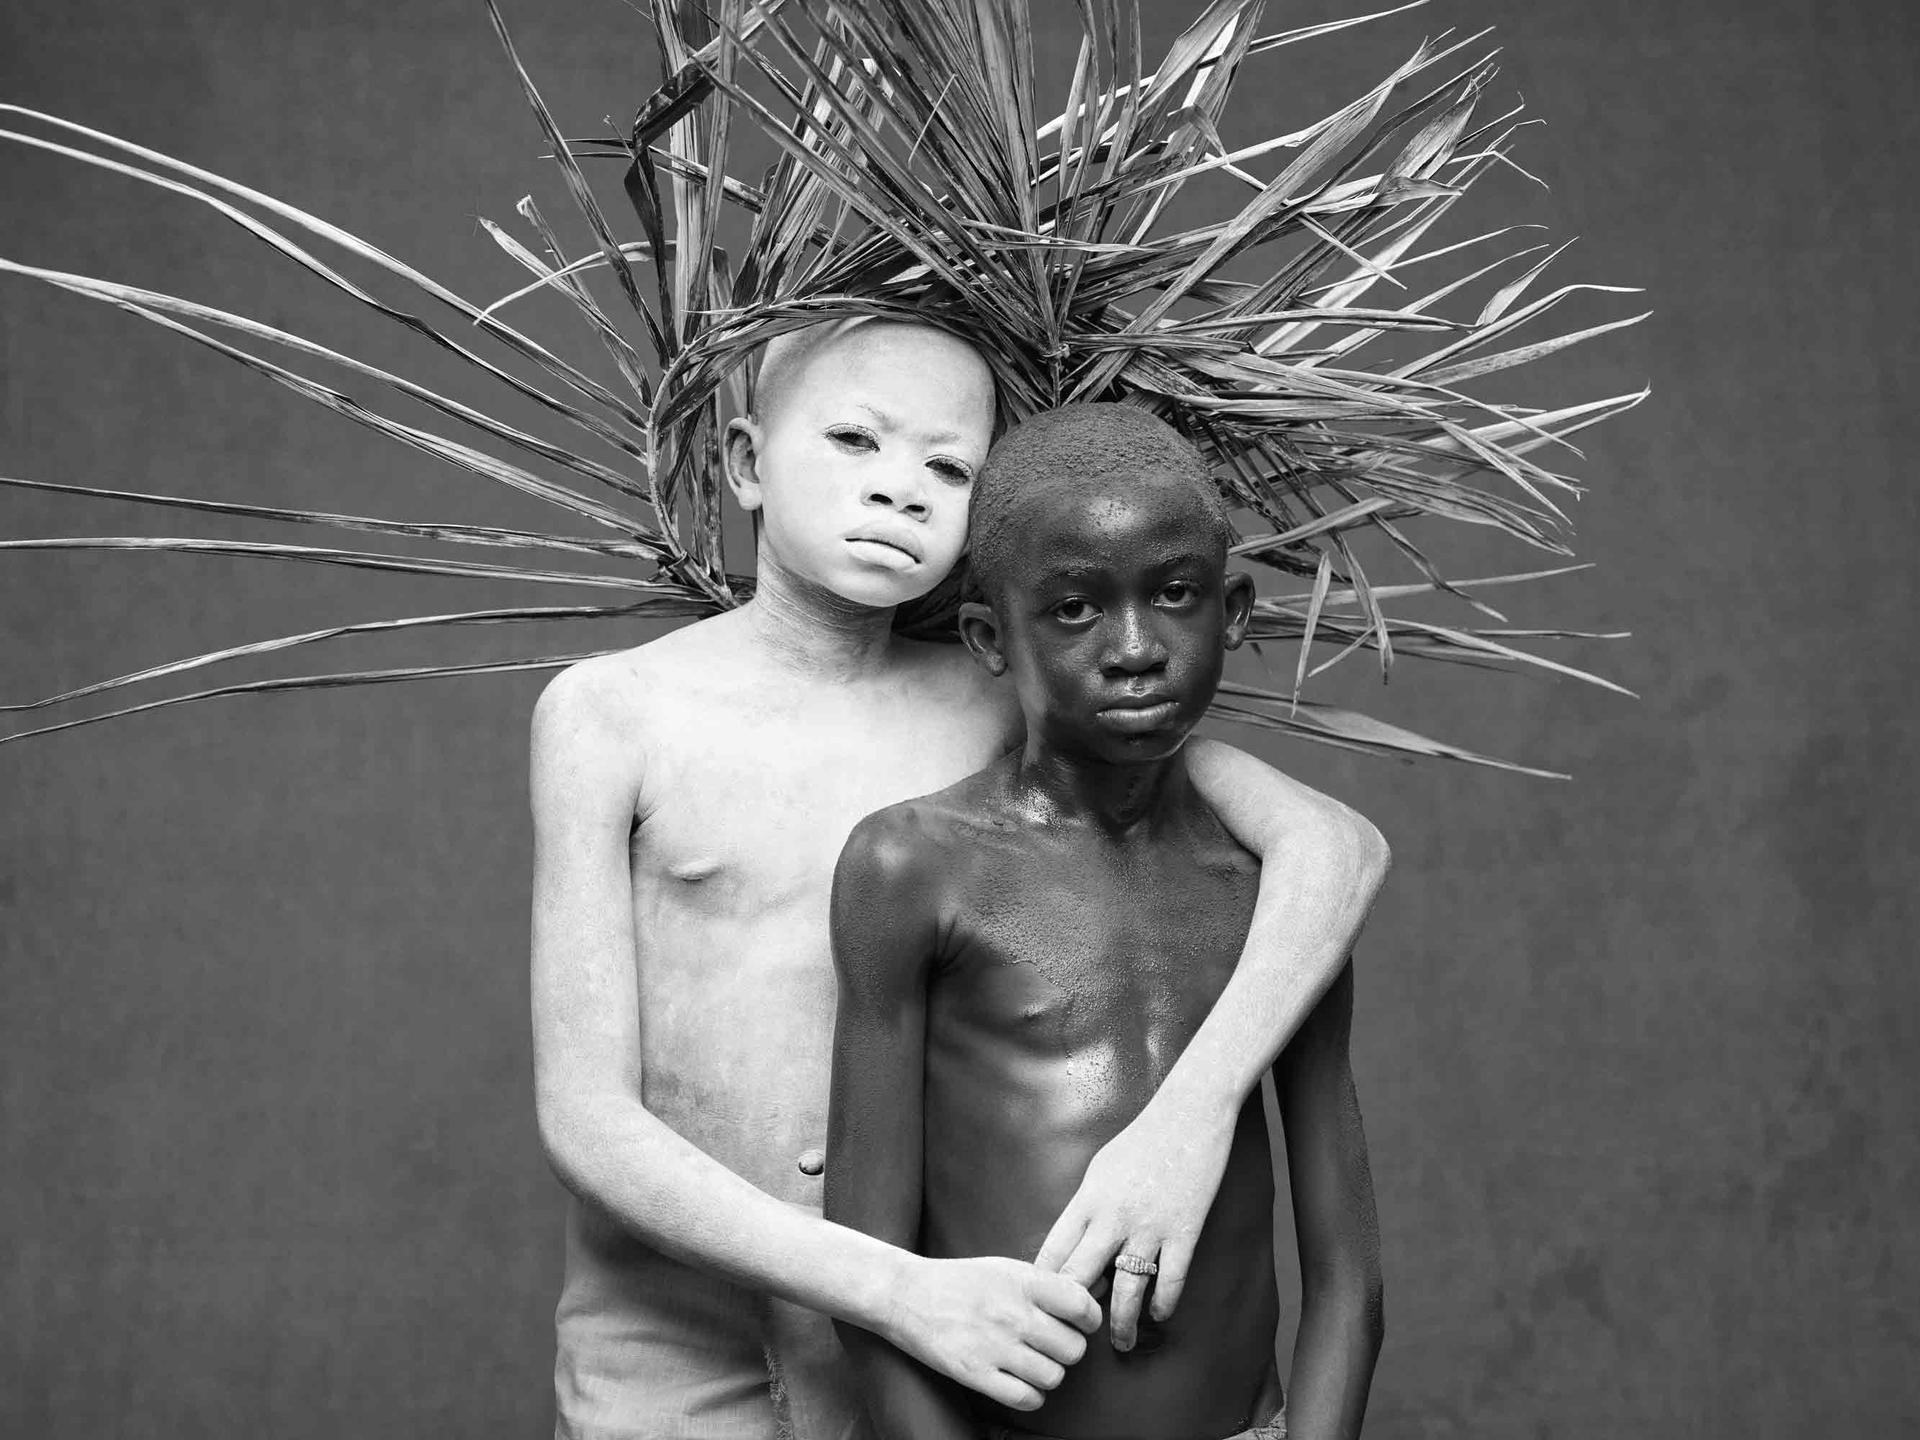 A boy wearing white body paint and a wooden headdress has an arm around another boy as they pose for a portrait